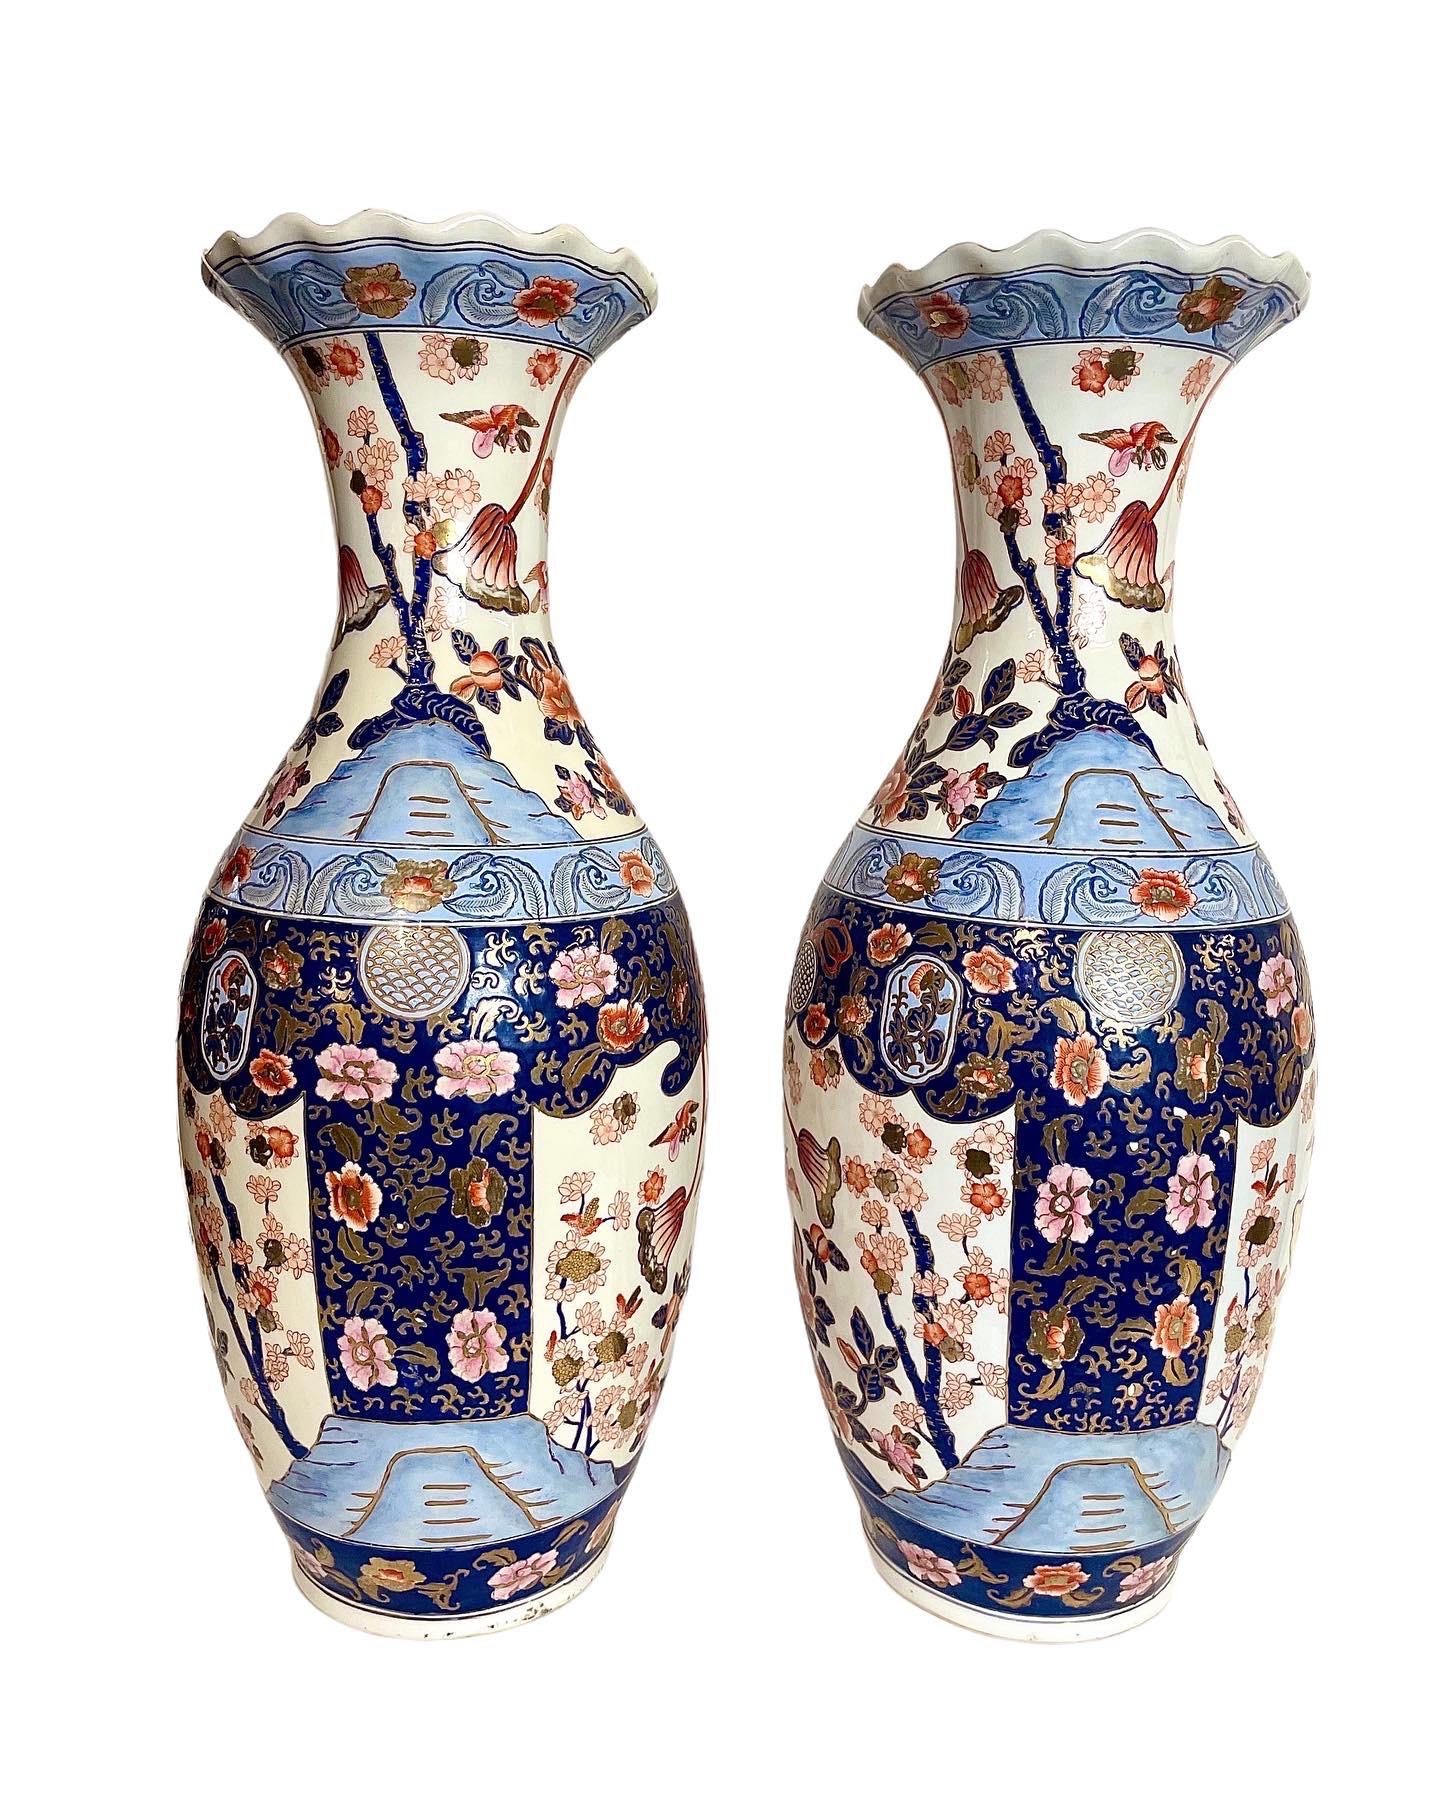 An impressive pair of antique Japanese Imari vases, dating from the start of the 20th century.  With a decor of birds, blossoms and foliage in shades of iron red, navy, and delicate pinks and blues, the design is highlighted with applied gilt and